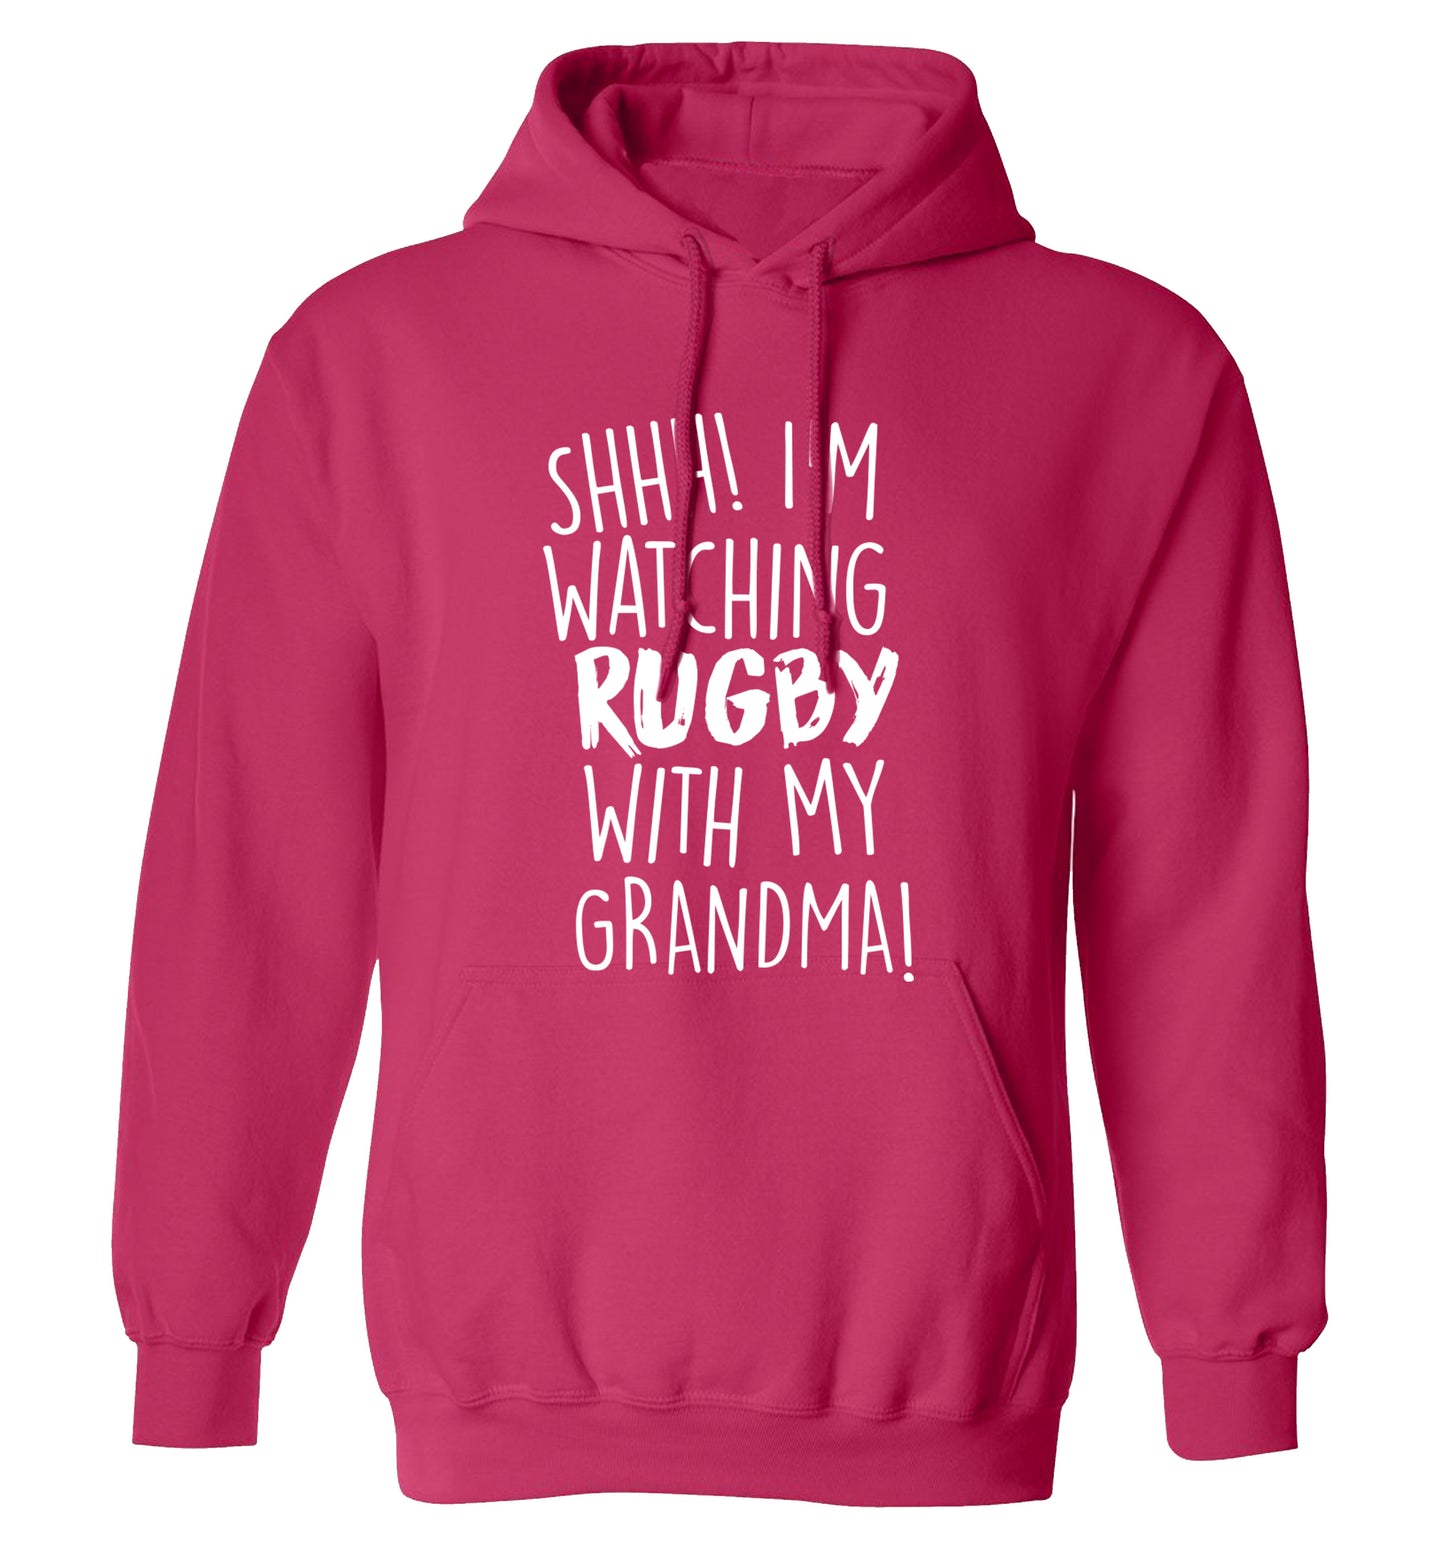 Shh I'm watching rugby with my grandma adults unisex pink hoodie 2XL